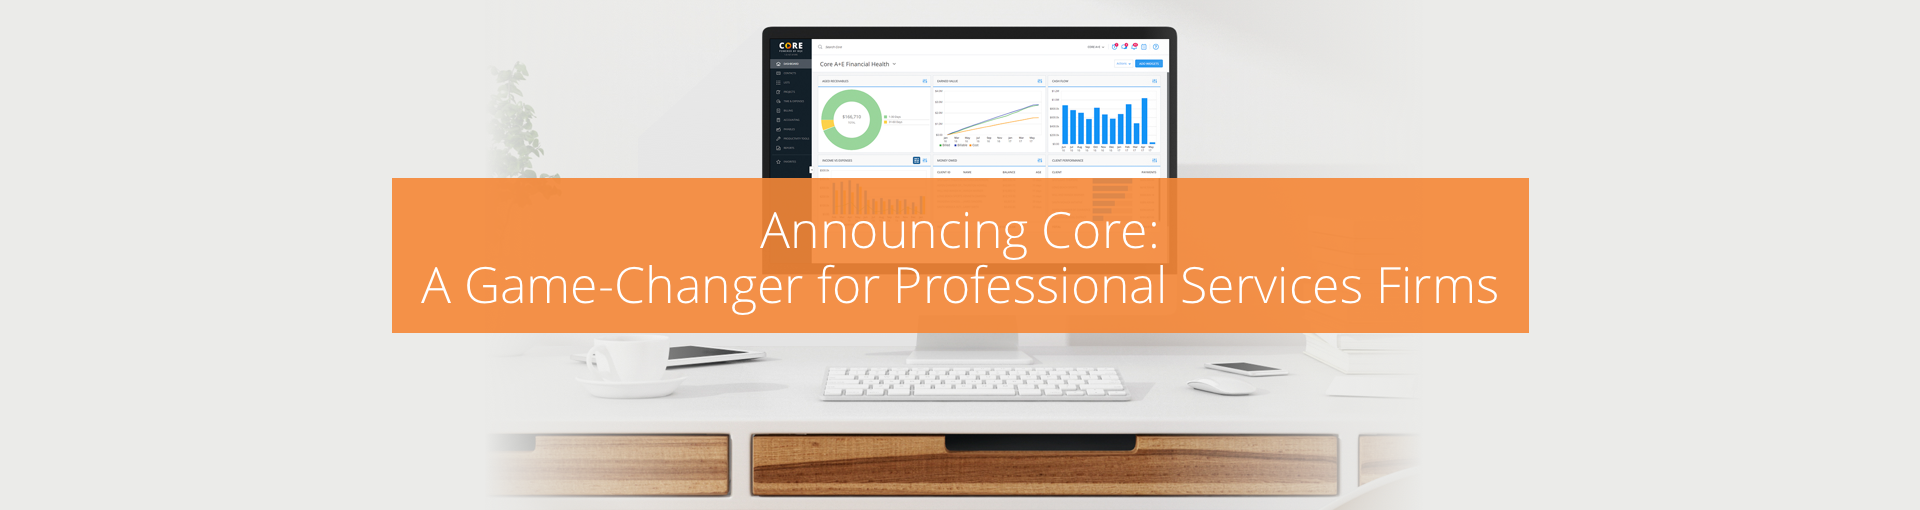 Announcing CORE: A Game-Changer for Professional Services Firms Featured Image